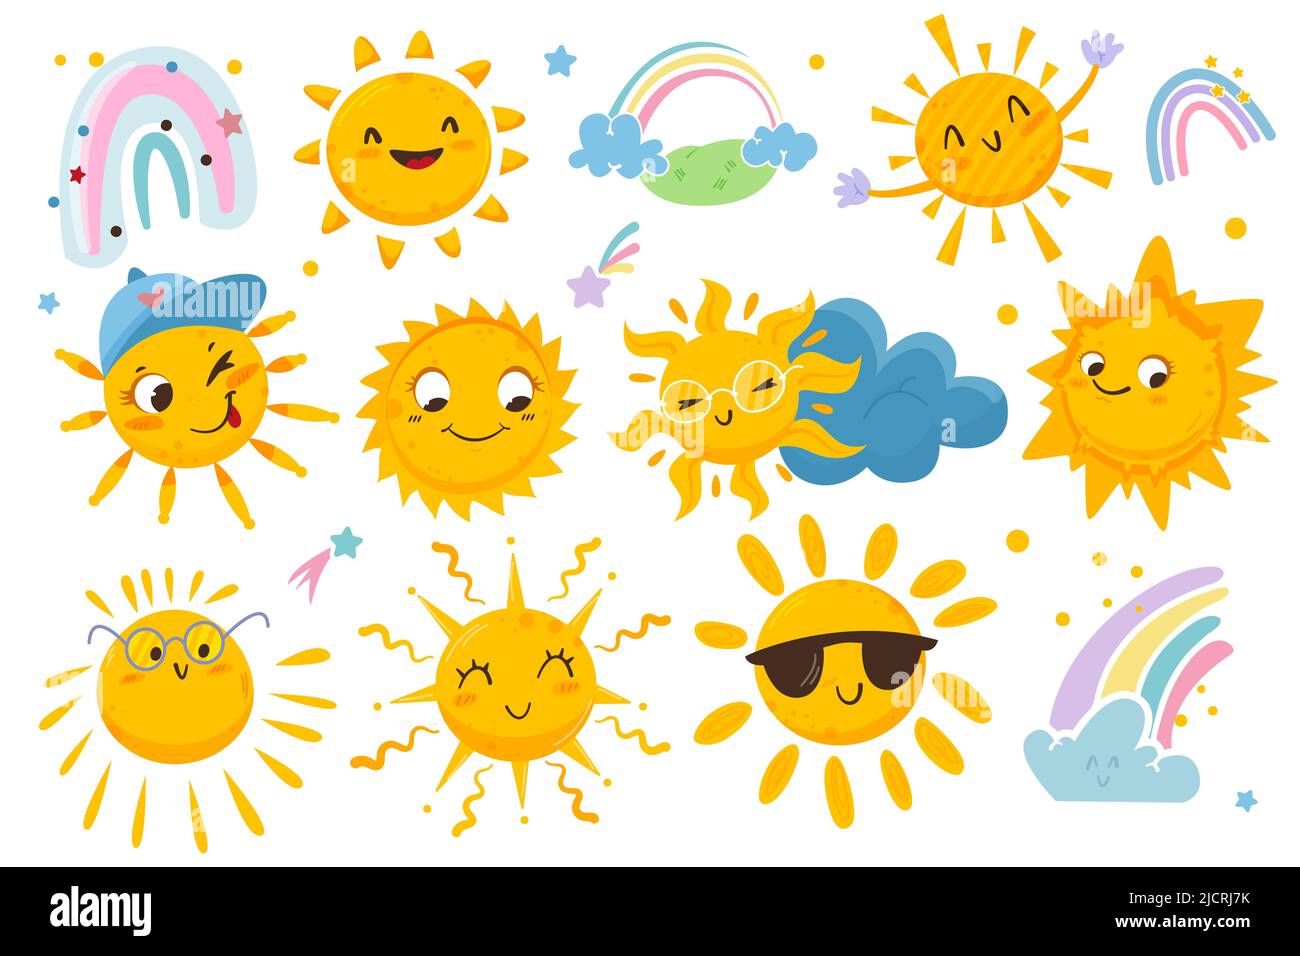 Cute sun flat vector stickers set with happy emotions, clouds and colorful rainbow. Funny characters in sunglasses, cap for kids. Cartoon sunny smiley icons. Yellow suns with positive expression faces Stock Vector